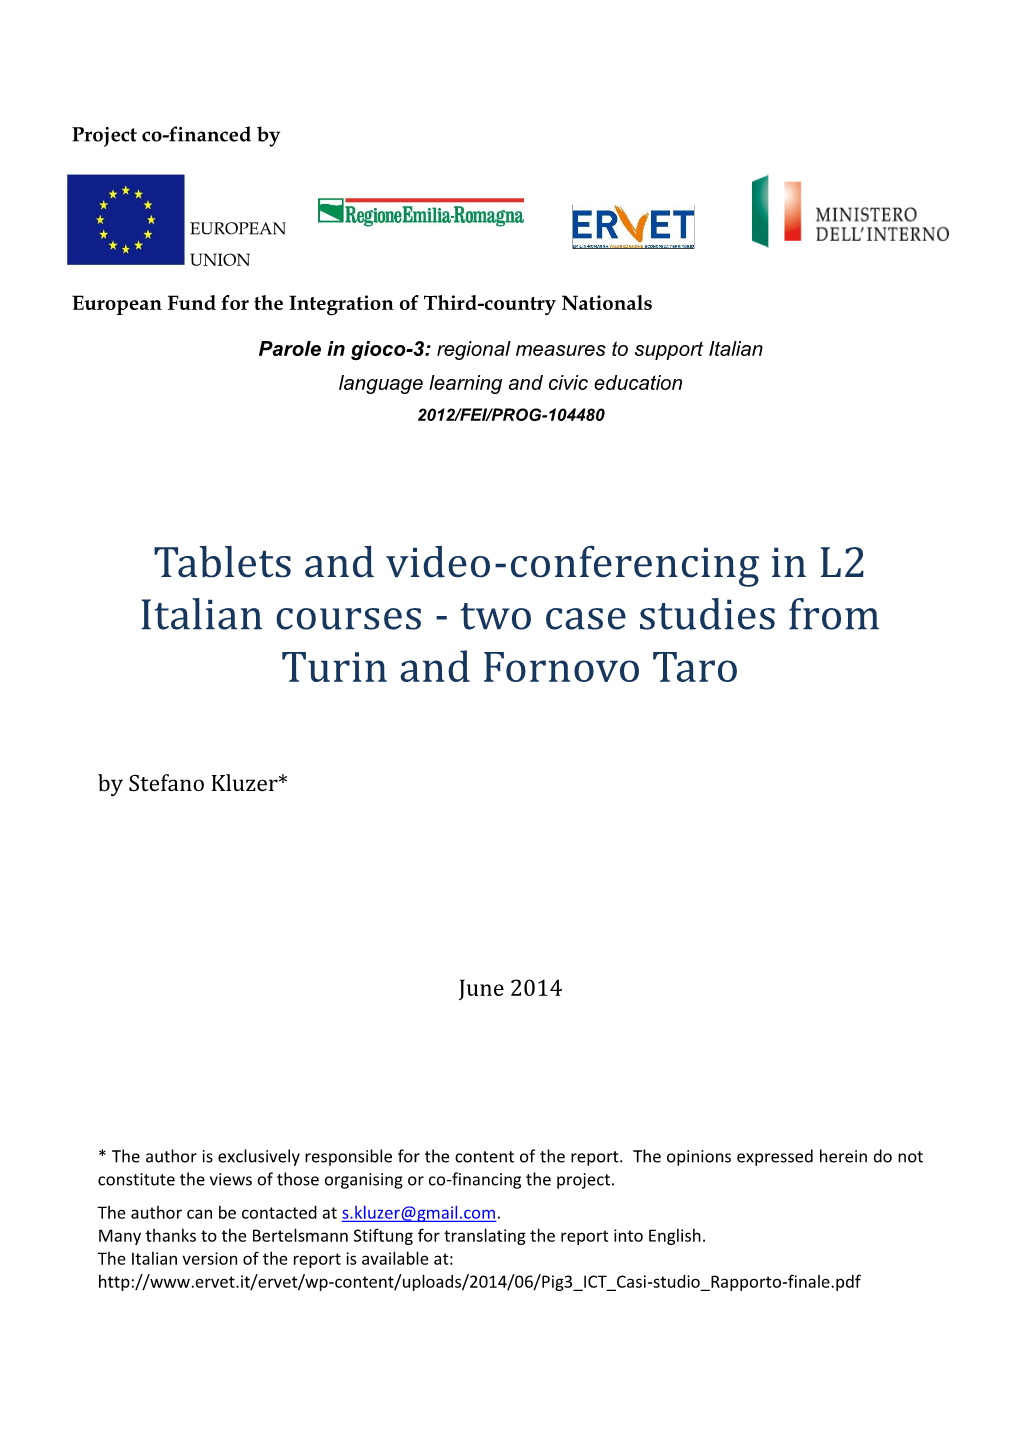 Tablets and Video-Conferencing in L2 Italian Courses - Two Case Studies From